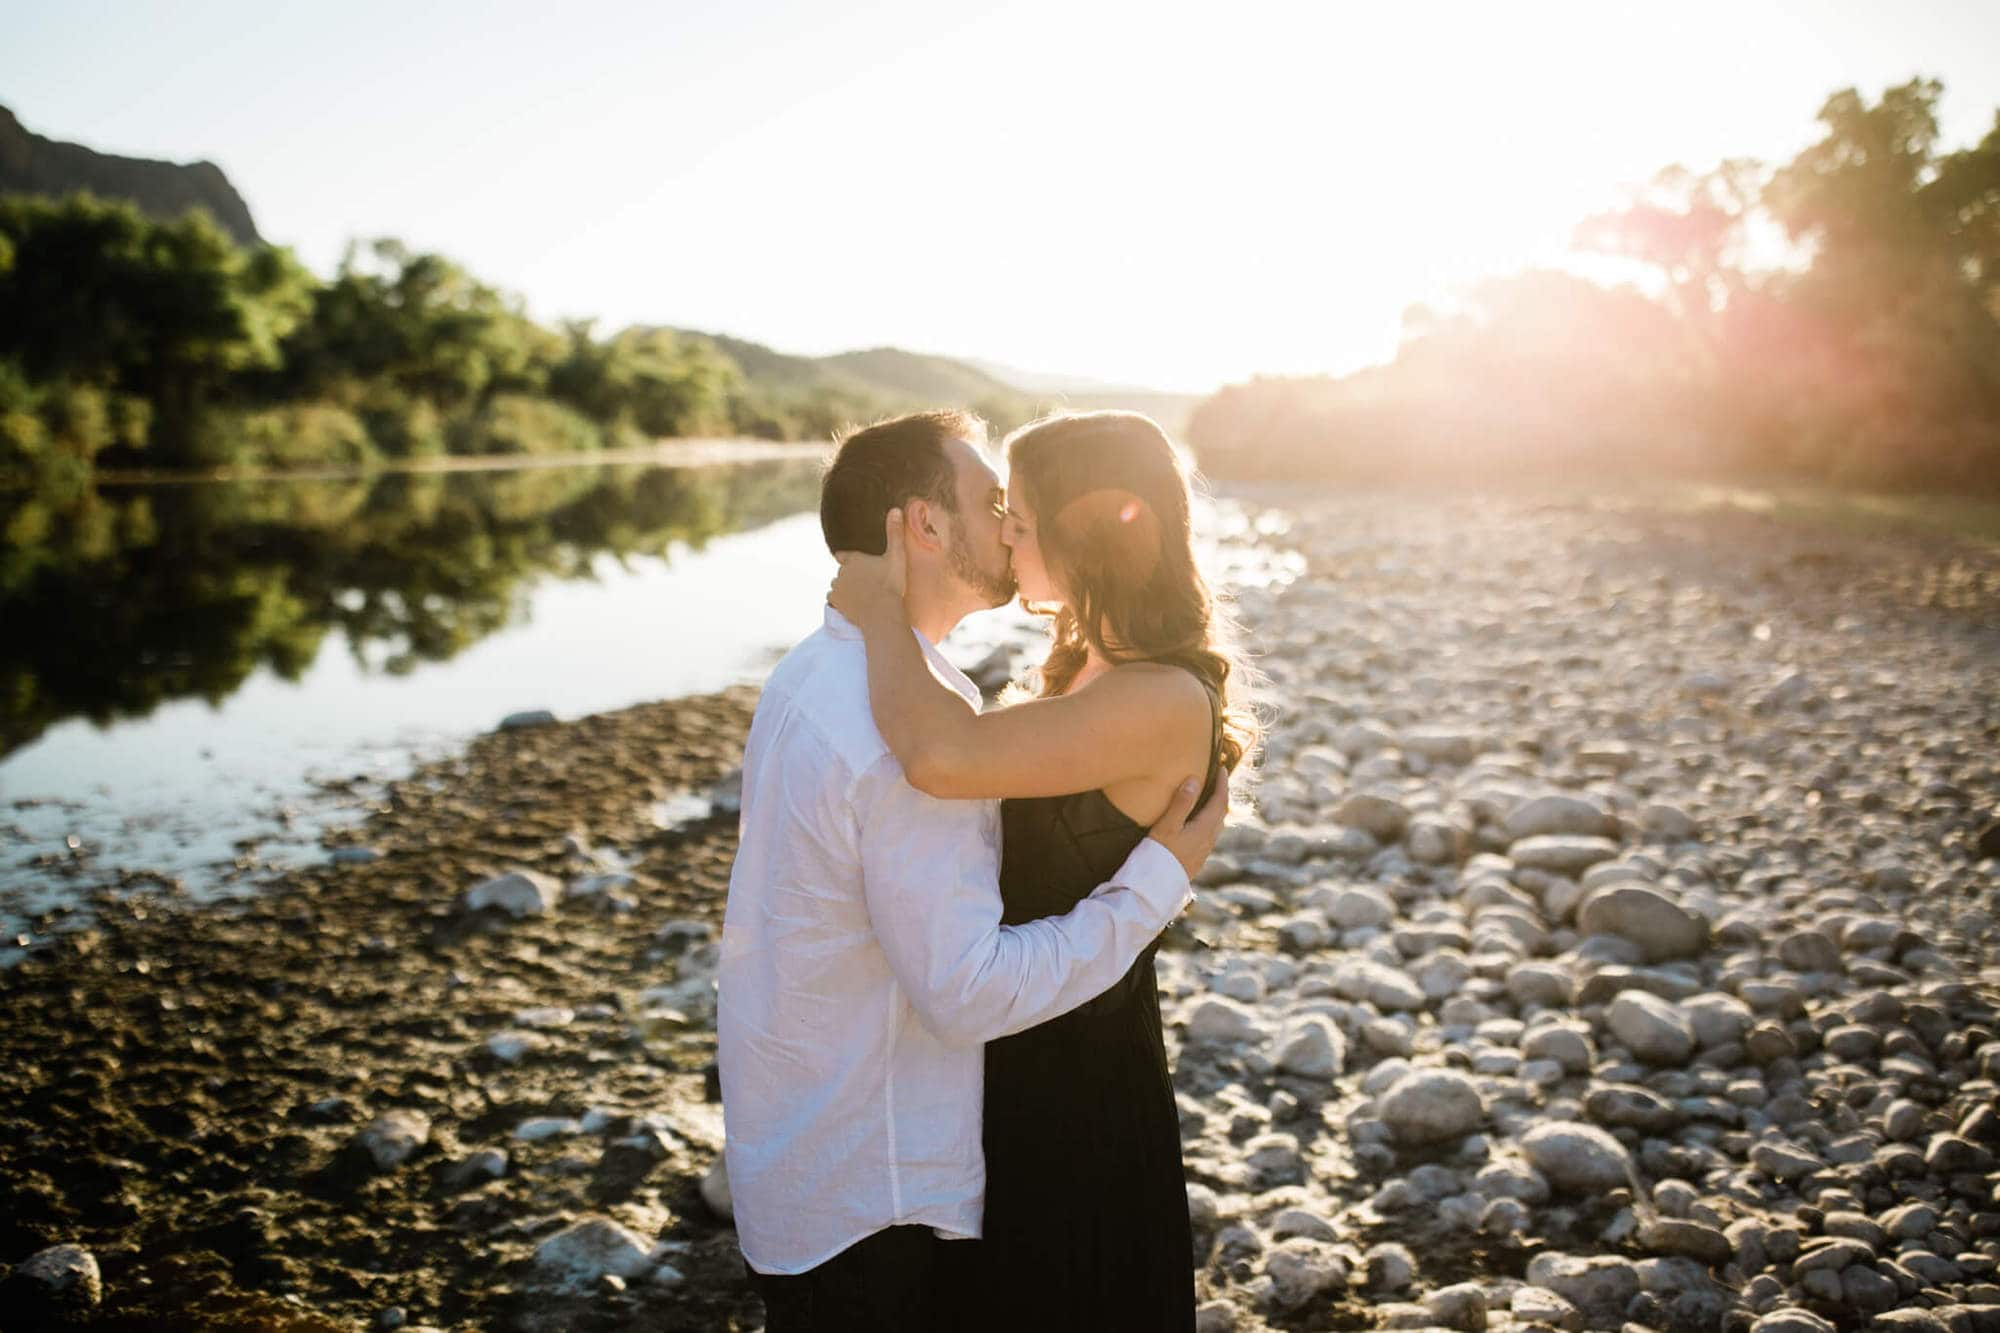 Logan and Nicole kiss with the Salt River winding into the distance behind them, the sun low on the horizon.